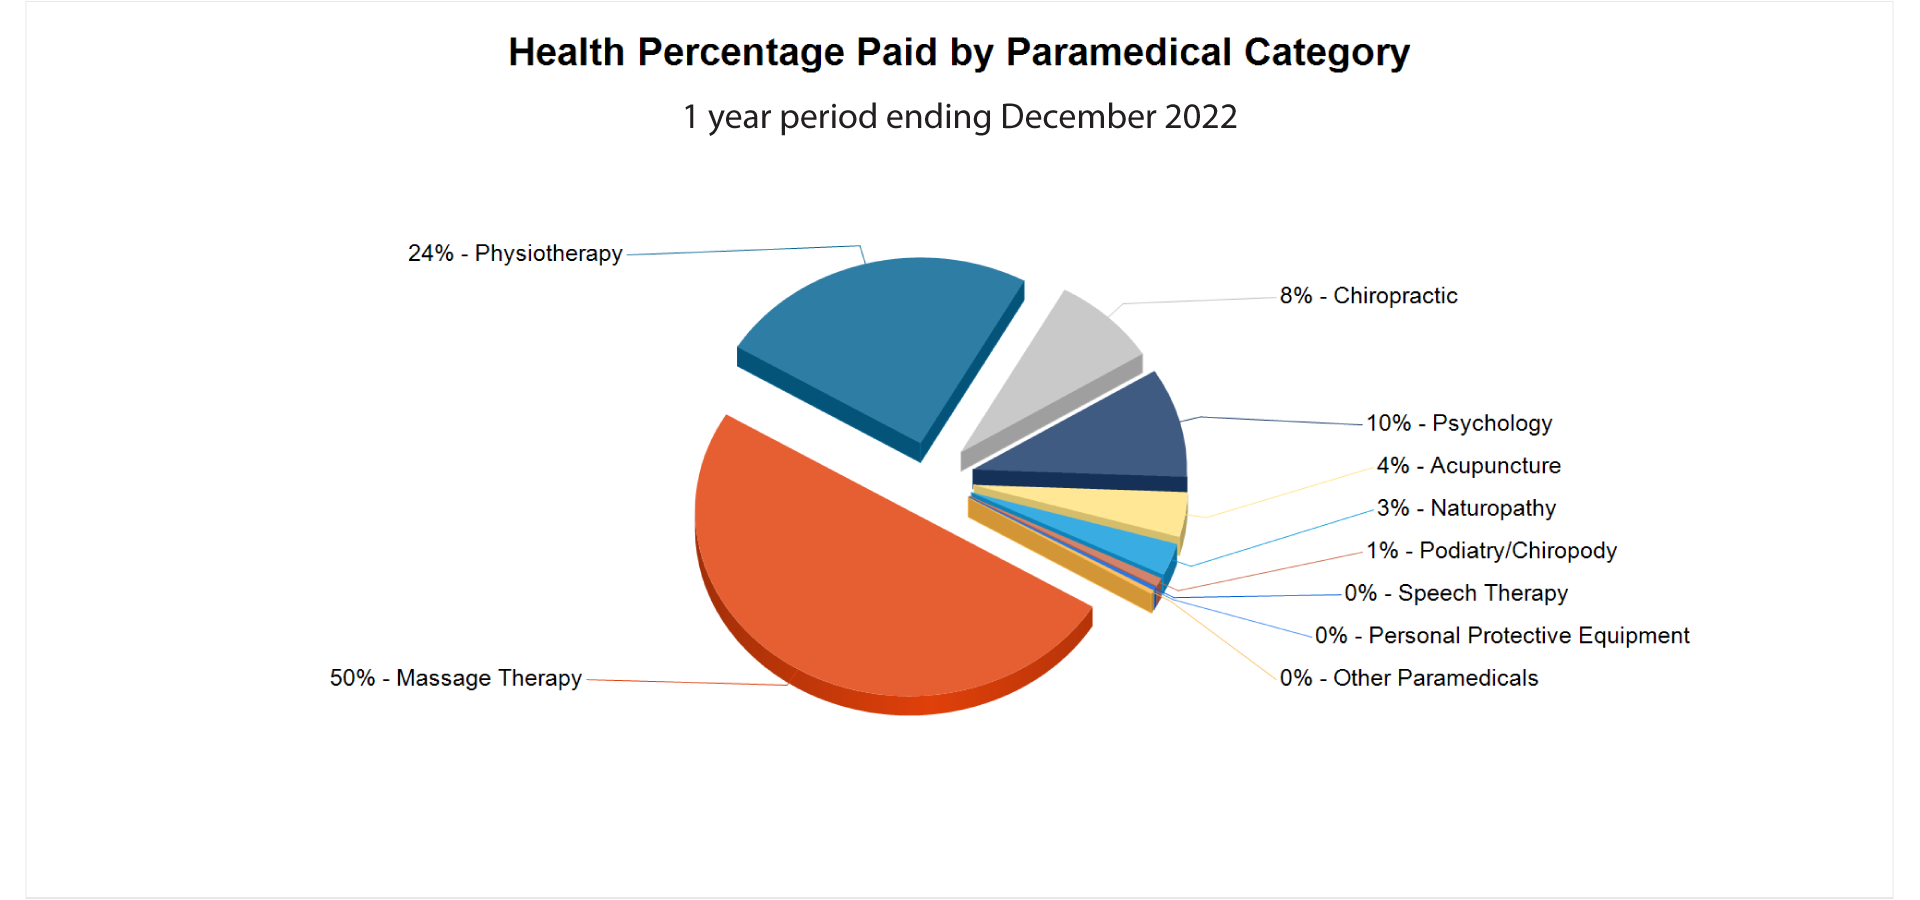 Health Percentage Paid By Paramedical Category